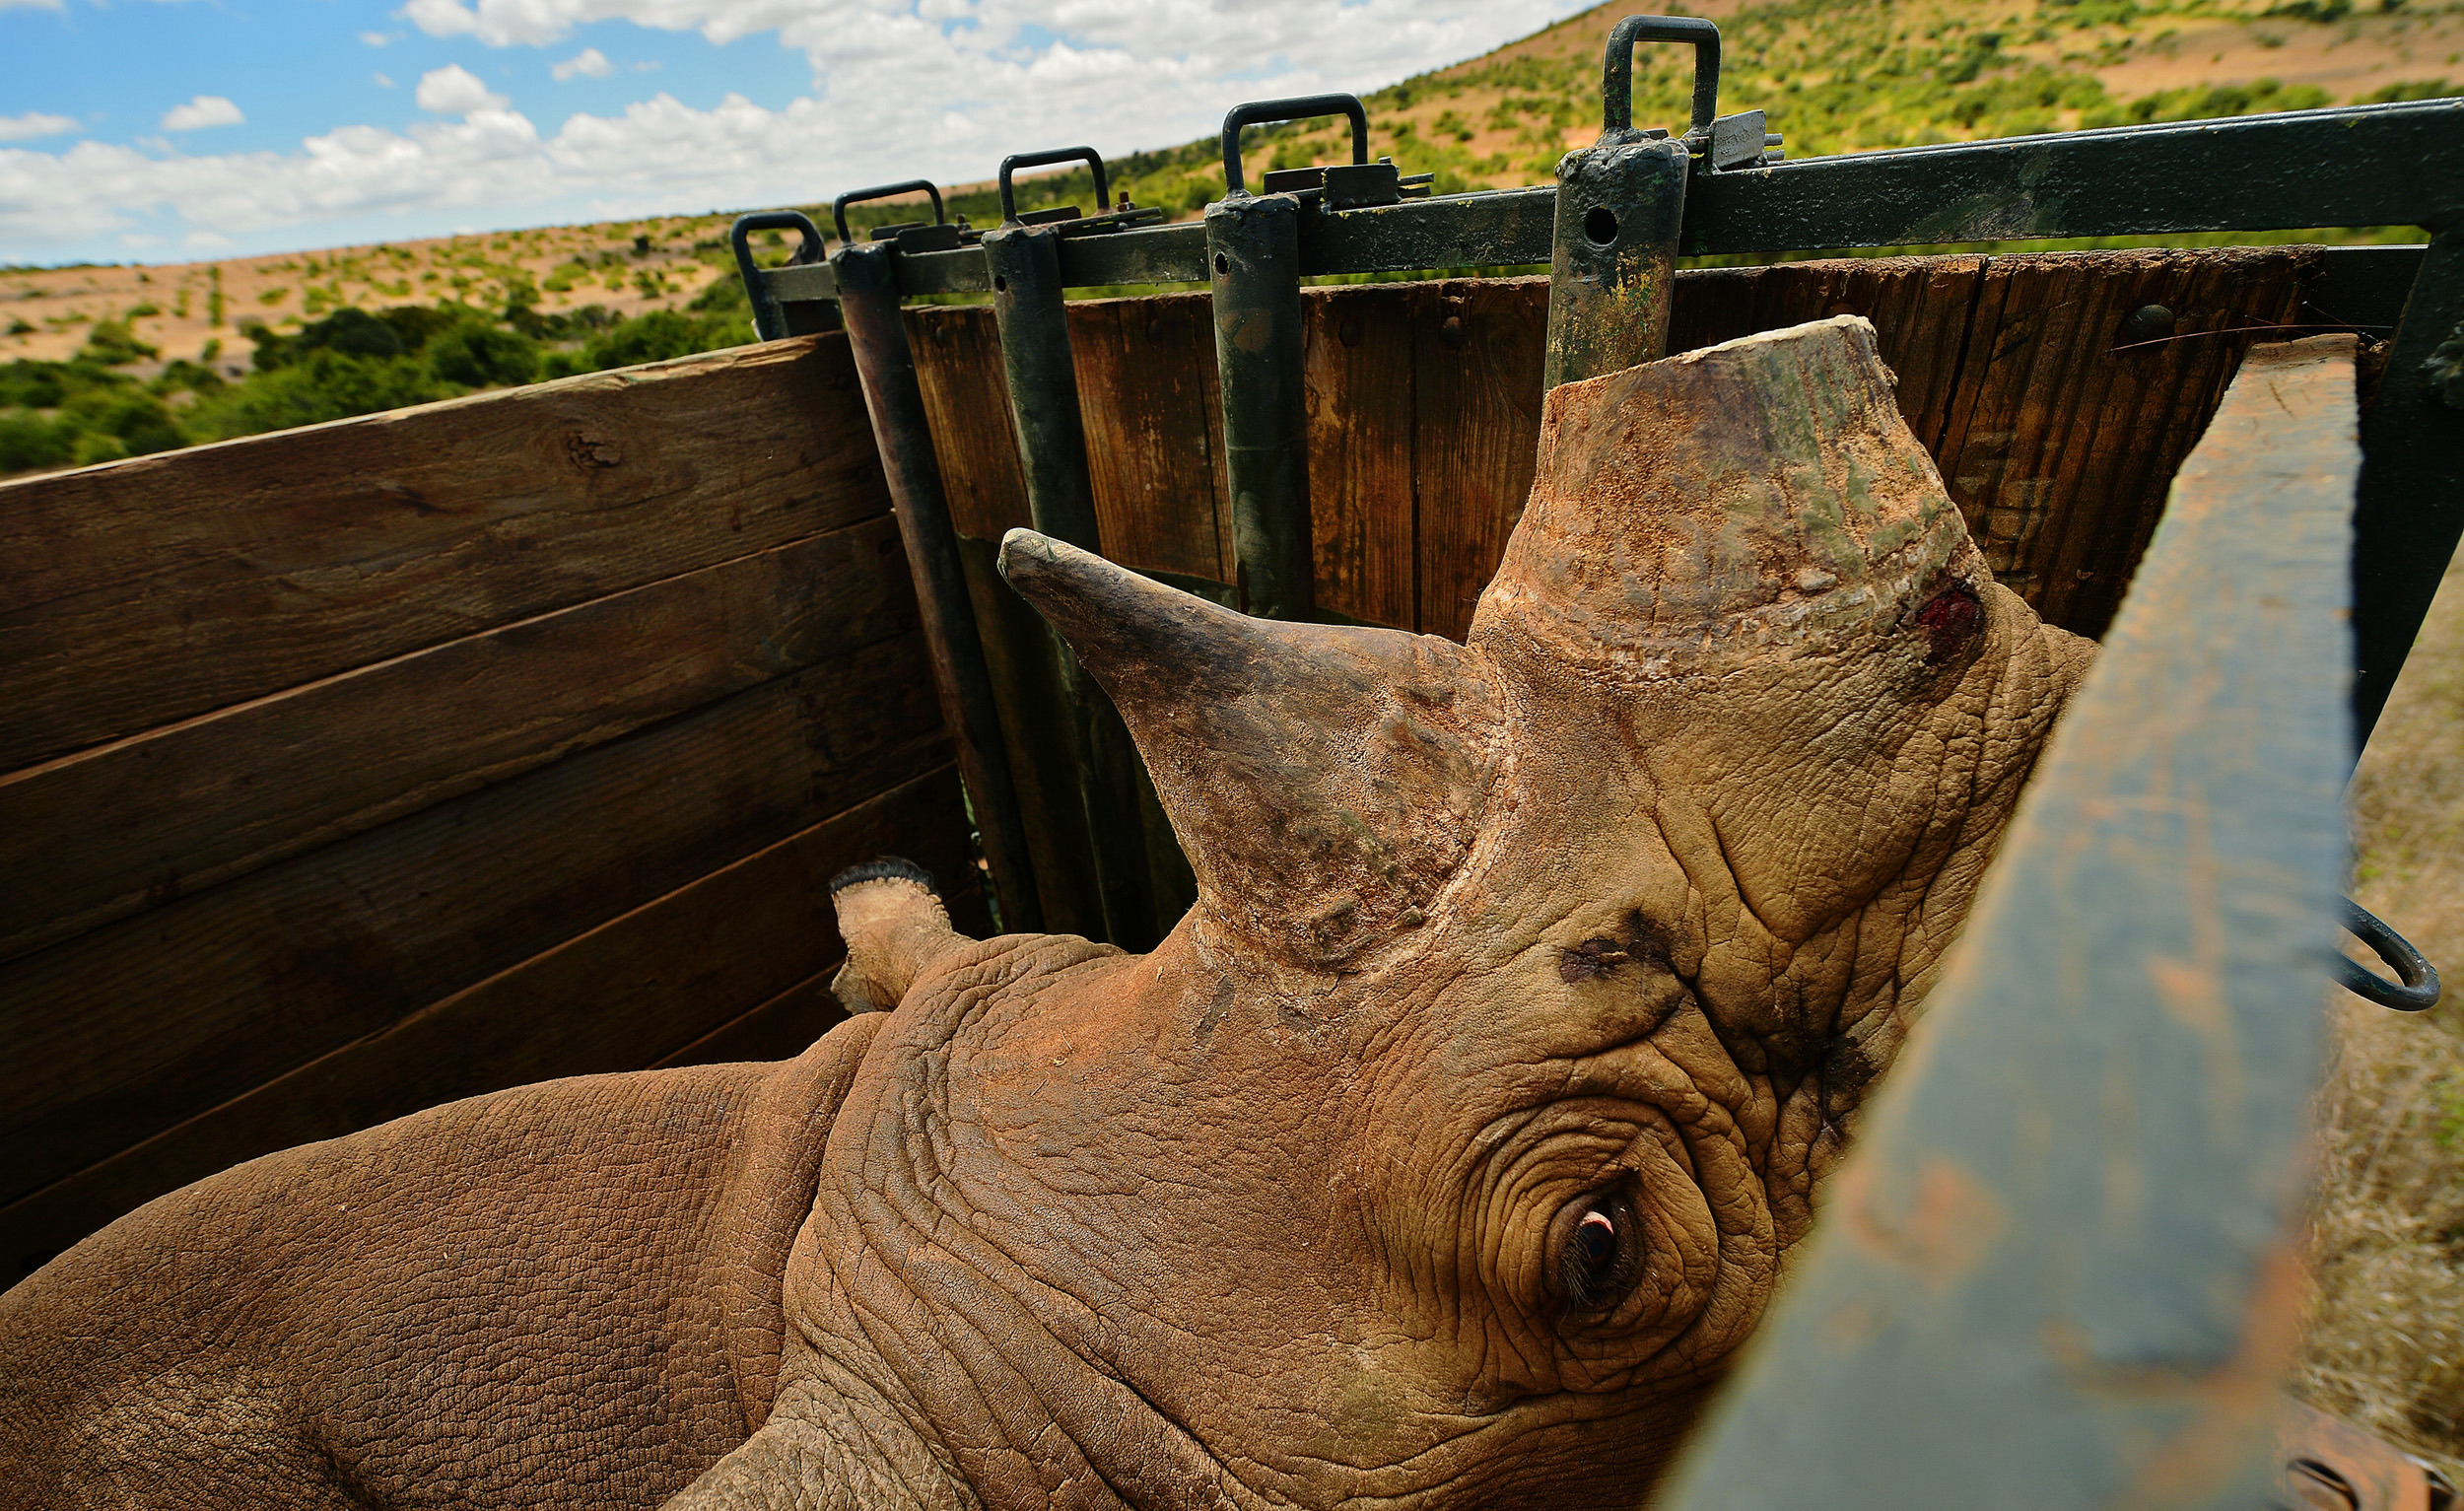 Consumer report uncovers why people buy rhino horn